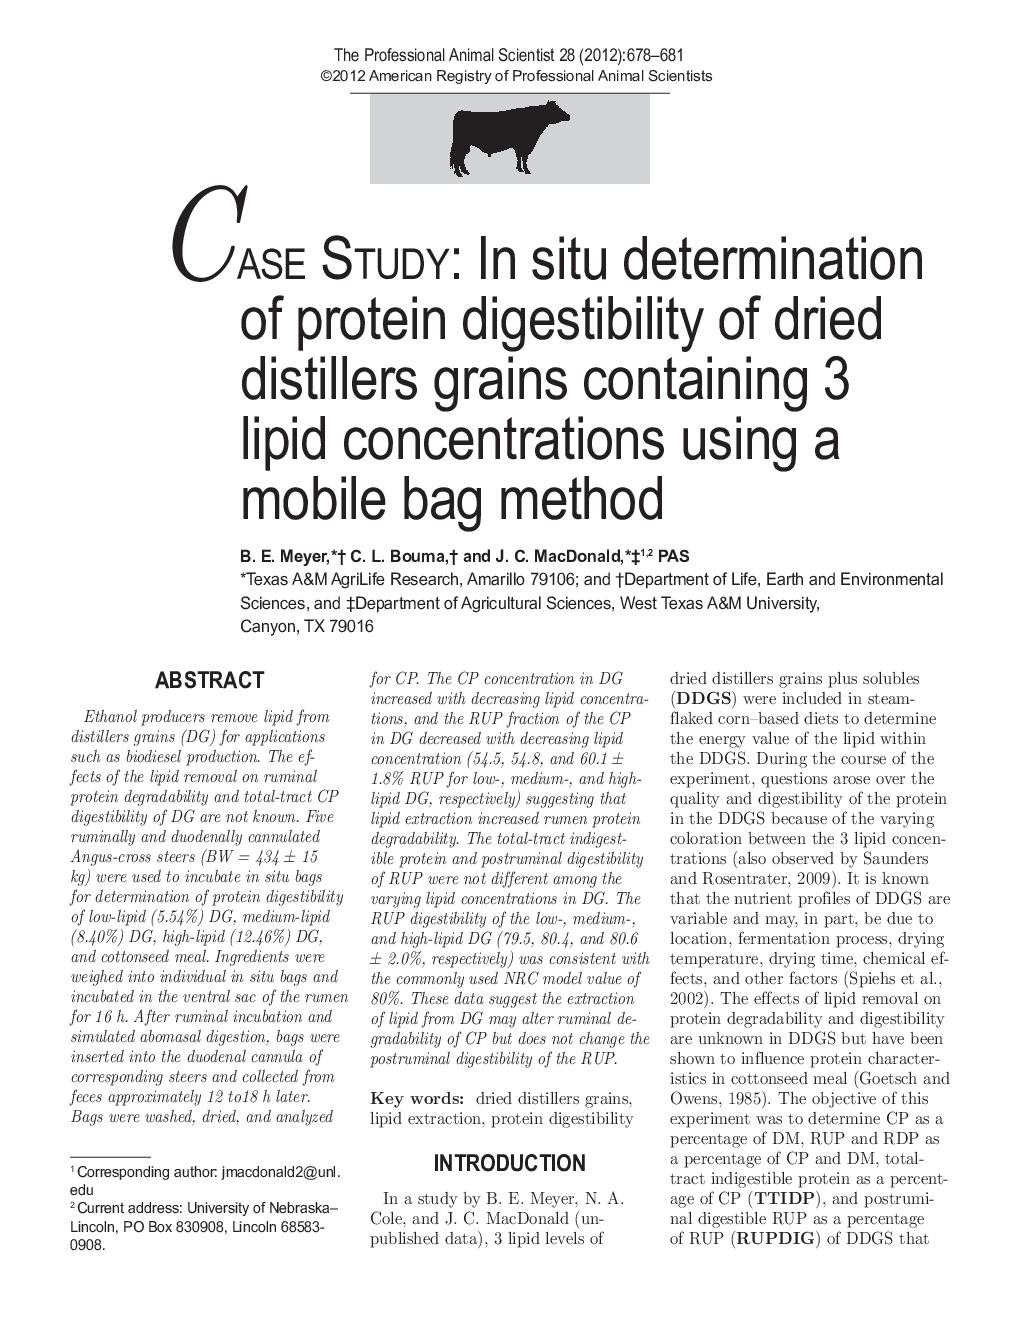 CASE STUDY: In situ determination of protein digestibility of dried distillers grains containing 3 lipid concentrations using a mobile bag method